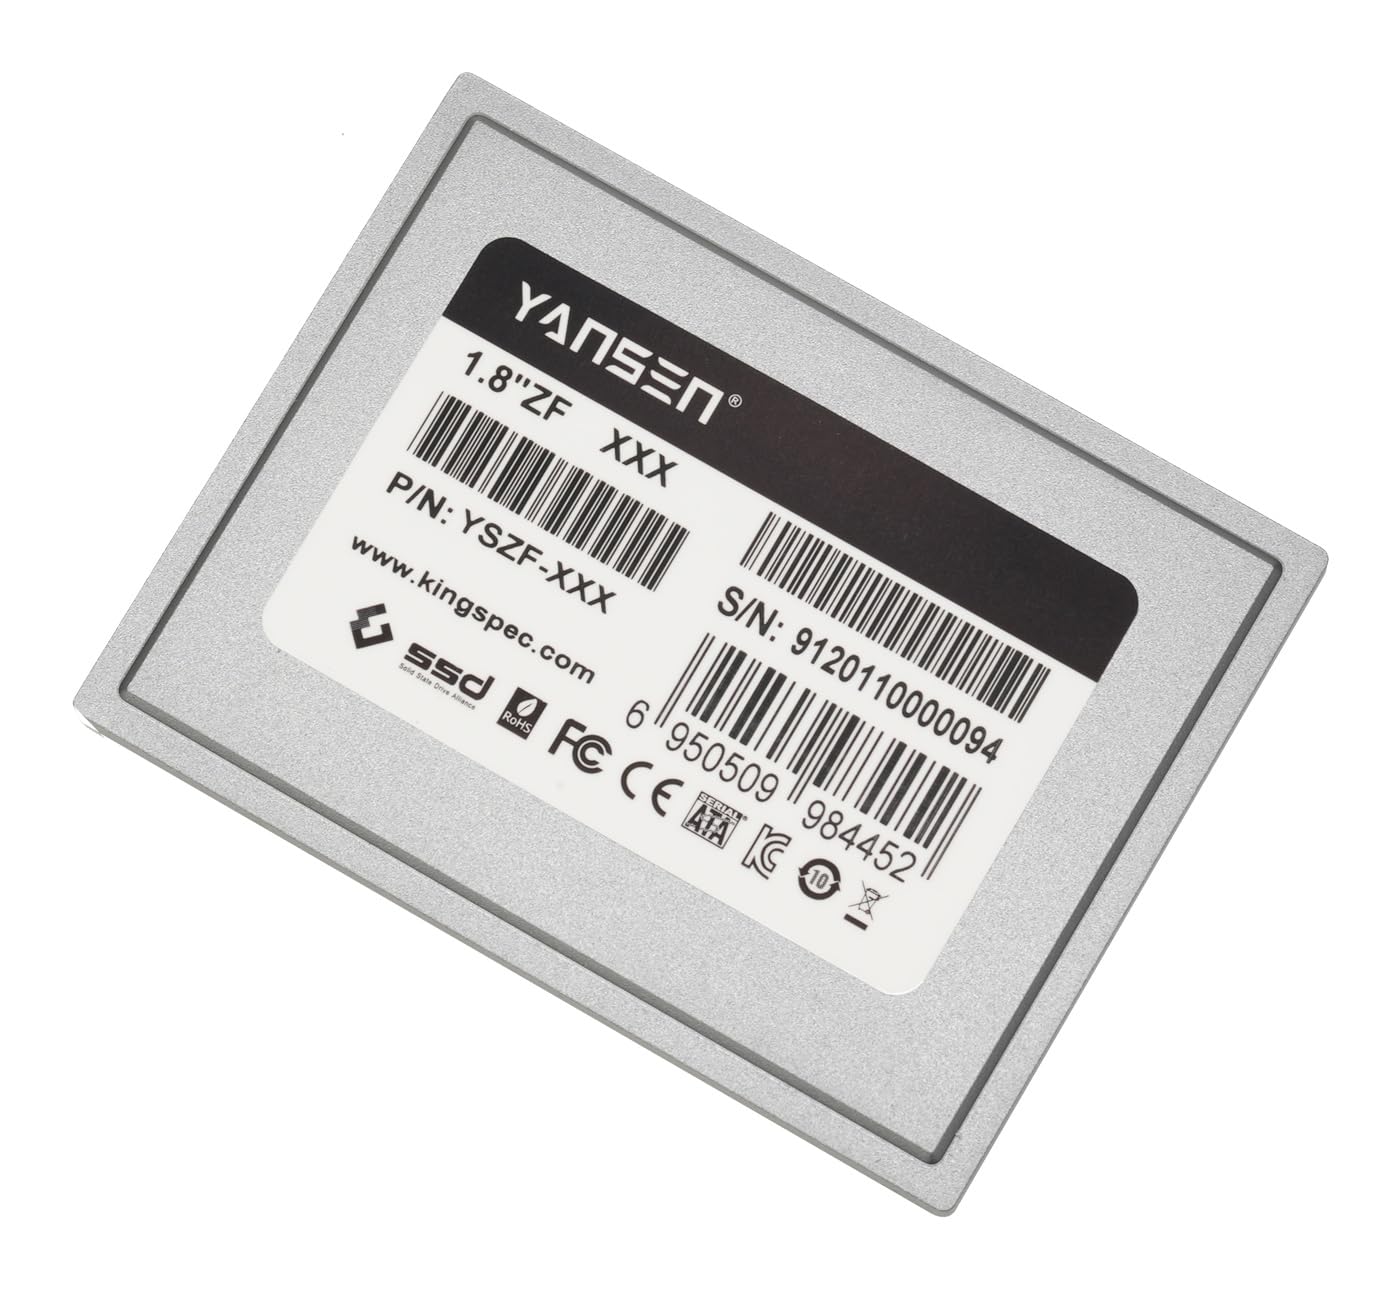 Yansen 128GB 1.8-inch ZIF 40-pin SSD Solid State Disk Industrial-Grade